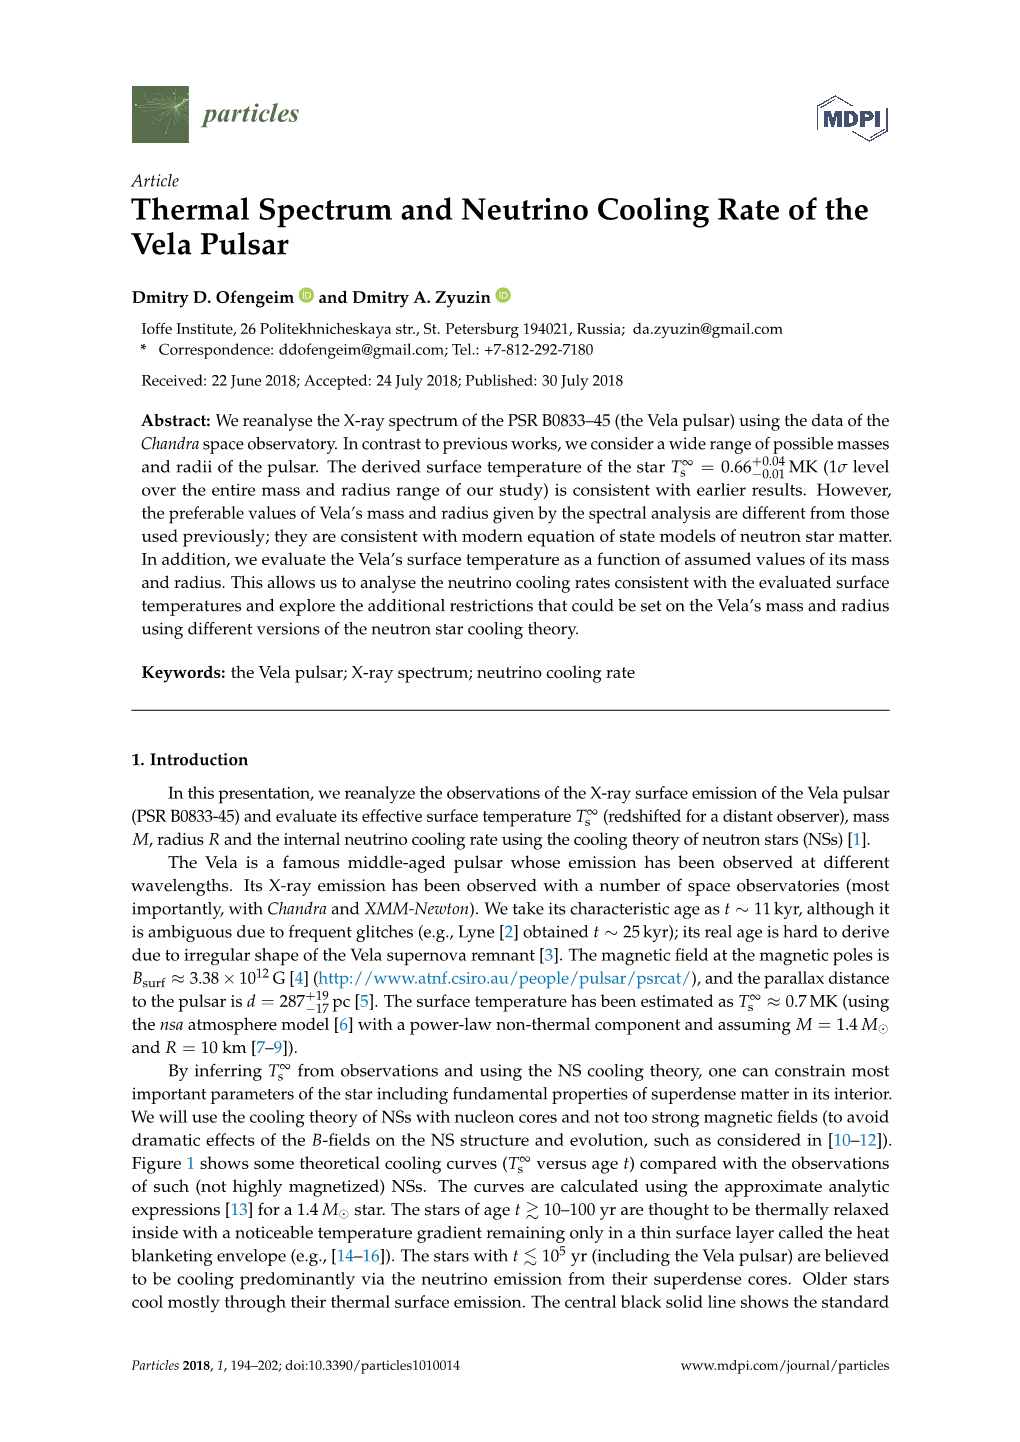 Thermal Spectrum and Neutrino Cooling Rate of the Vela Pulsar